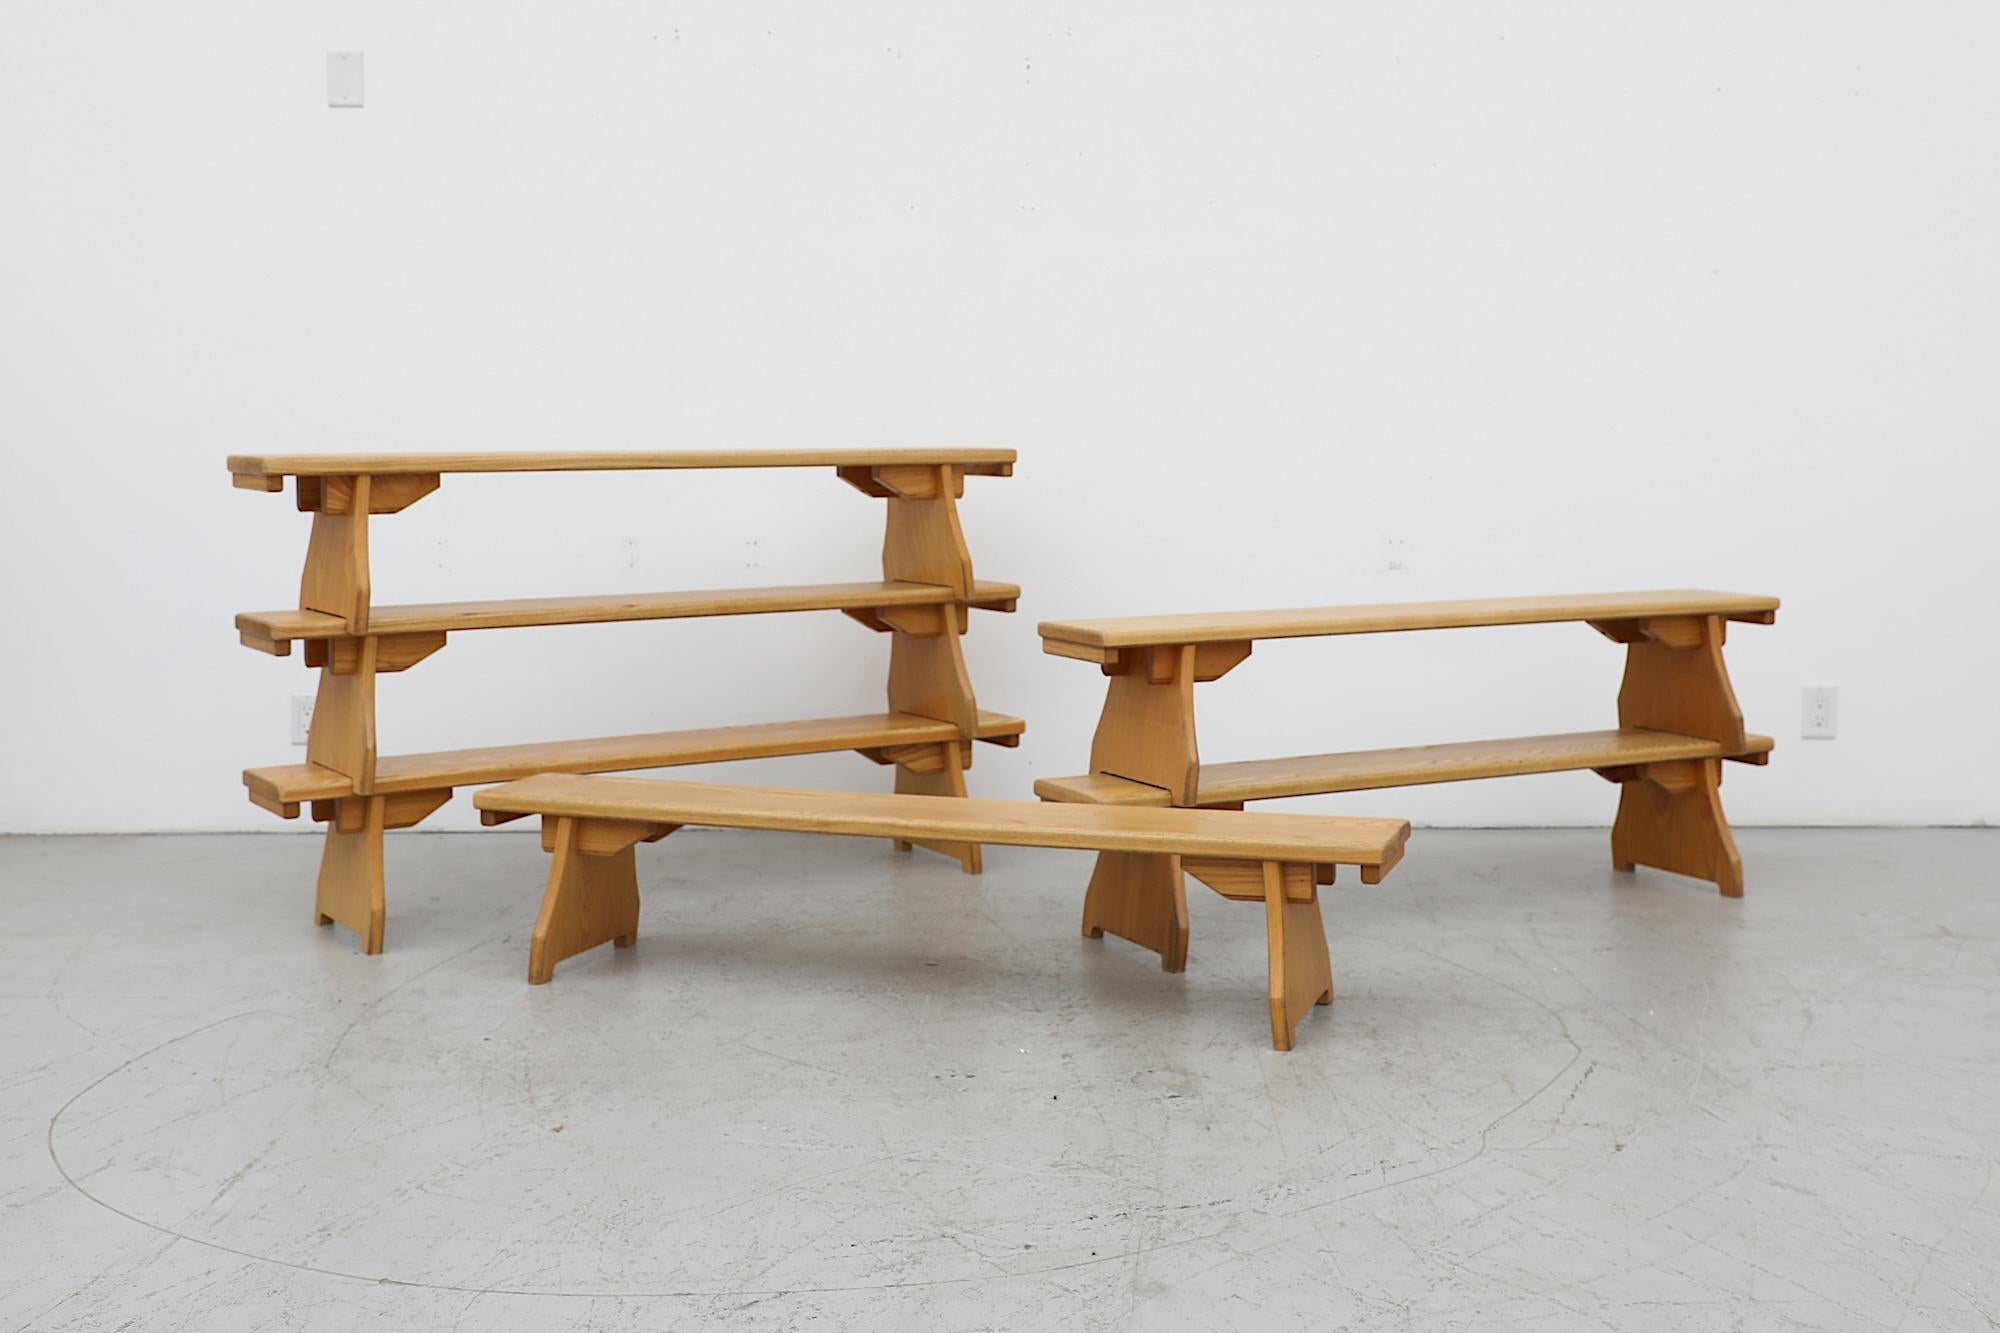 Mid-Century Børge Mogensen style trestle base pine benches with wide decorative legs. Each bench is in original condition with similar visible wear consistent with their age and use. Condition may vary from photos. Sold Individually.